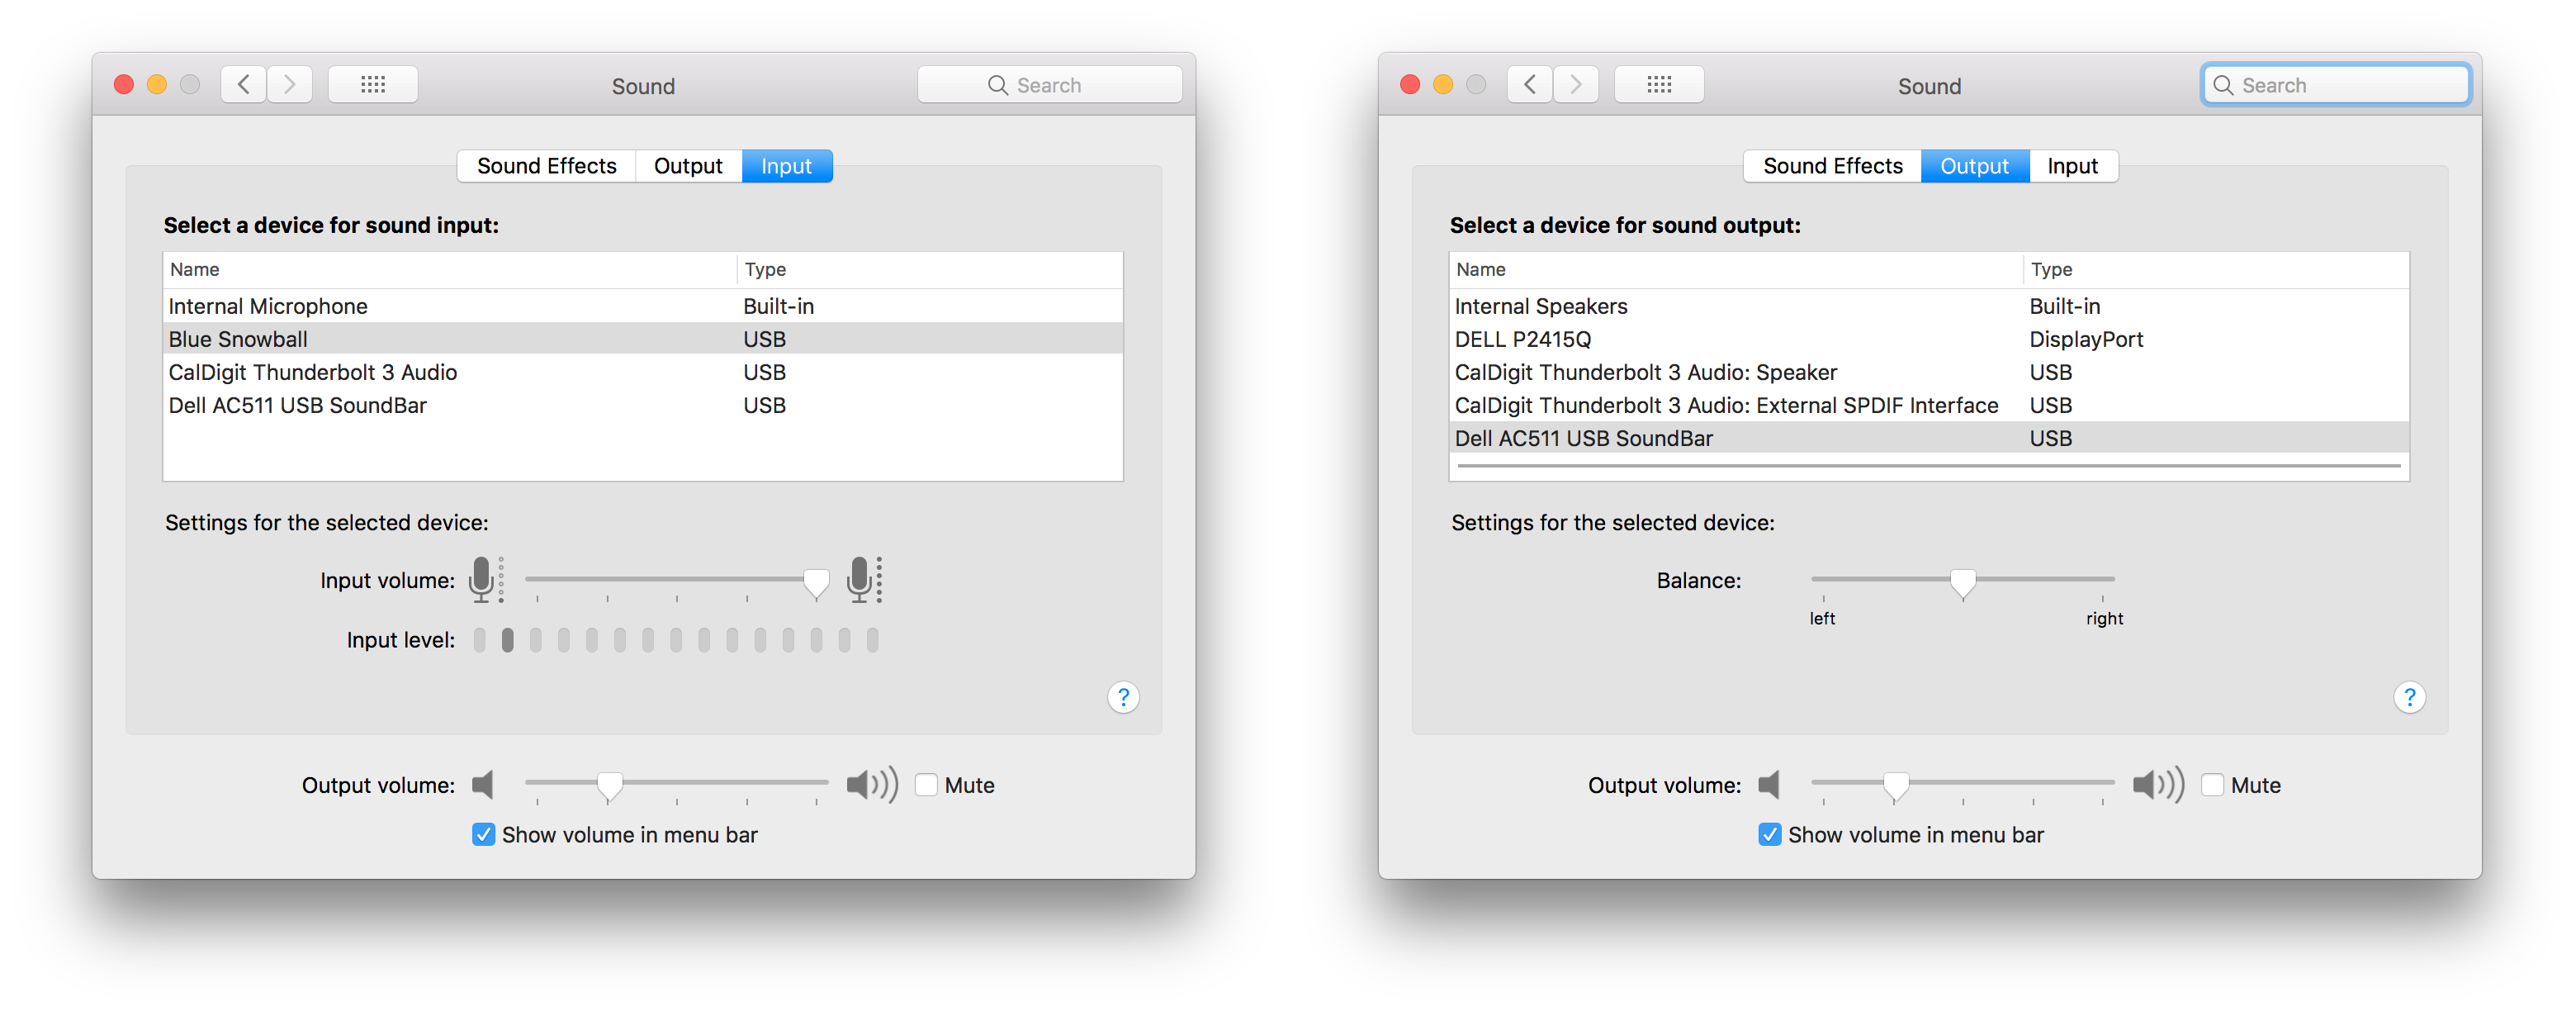 macOS audio outputs / inputs with Thunderbolt 3 and DisplayPort